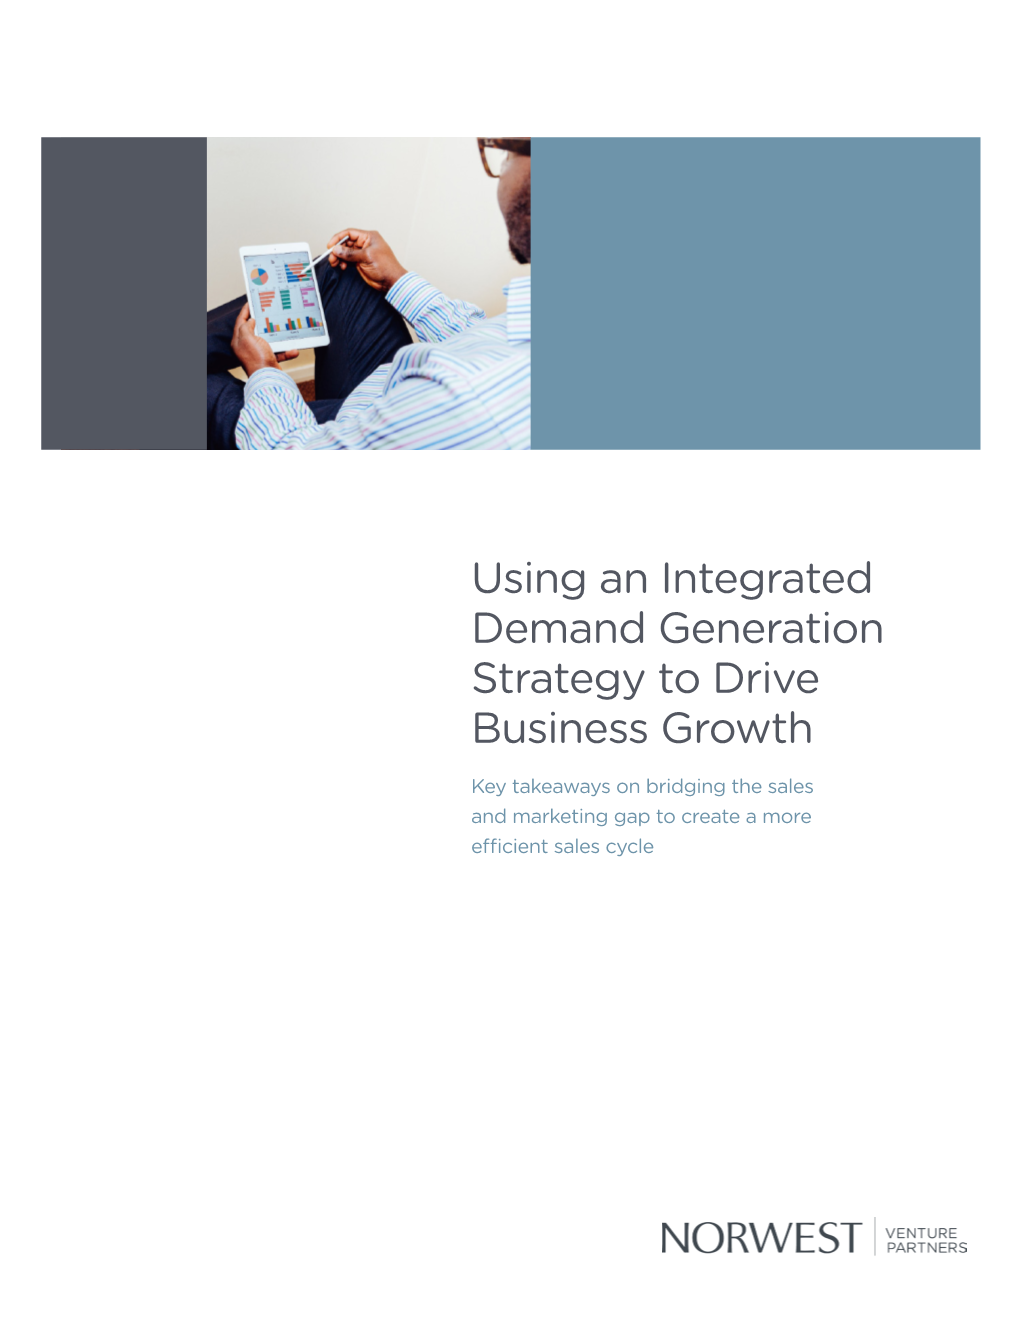 Using an Integrated Demand Generation Strategy to Drive Business Growth